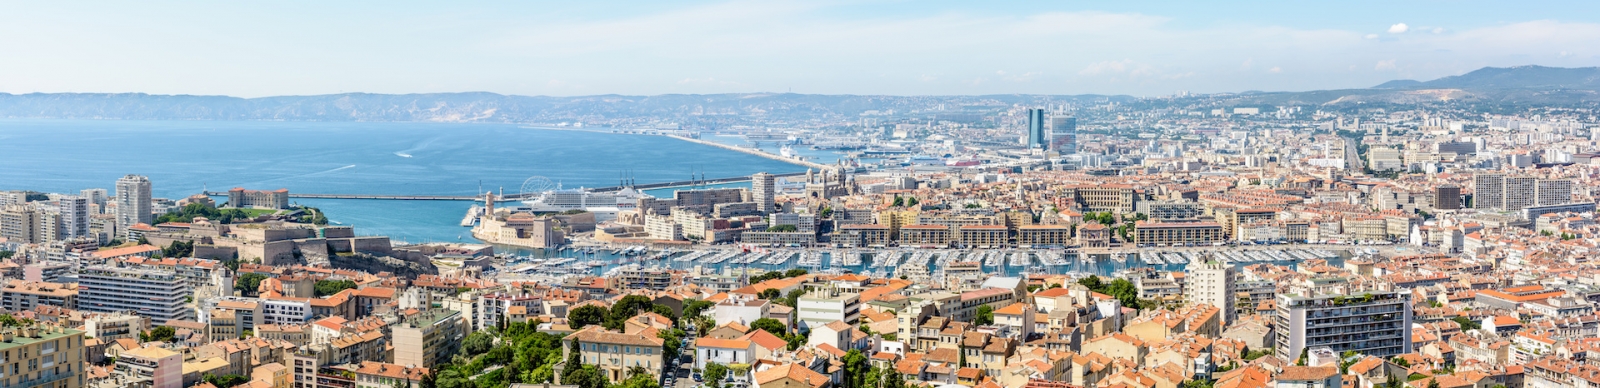 Panoramic view over the Old Port, the historic center of Le Panier, the Great Seaport of Marseille, the coastline and the north districts in the distance